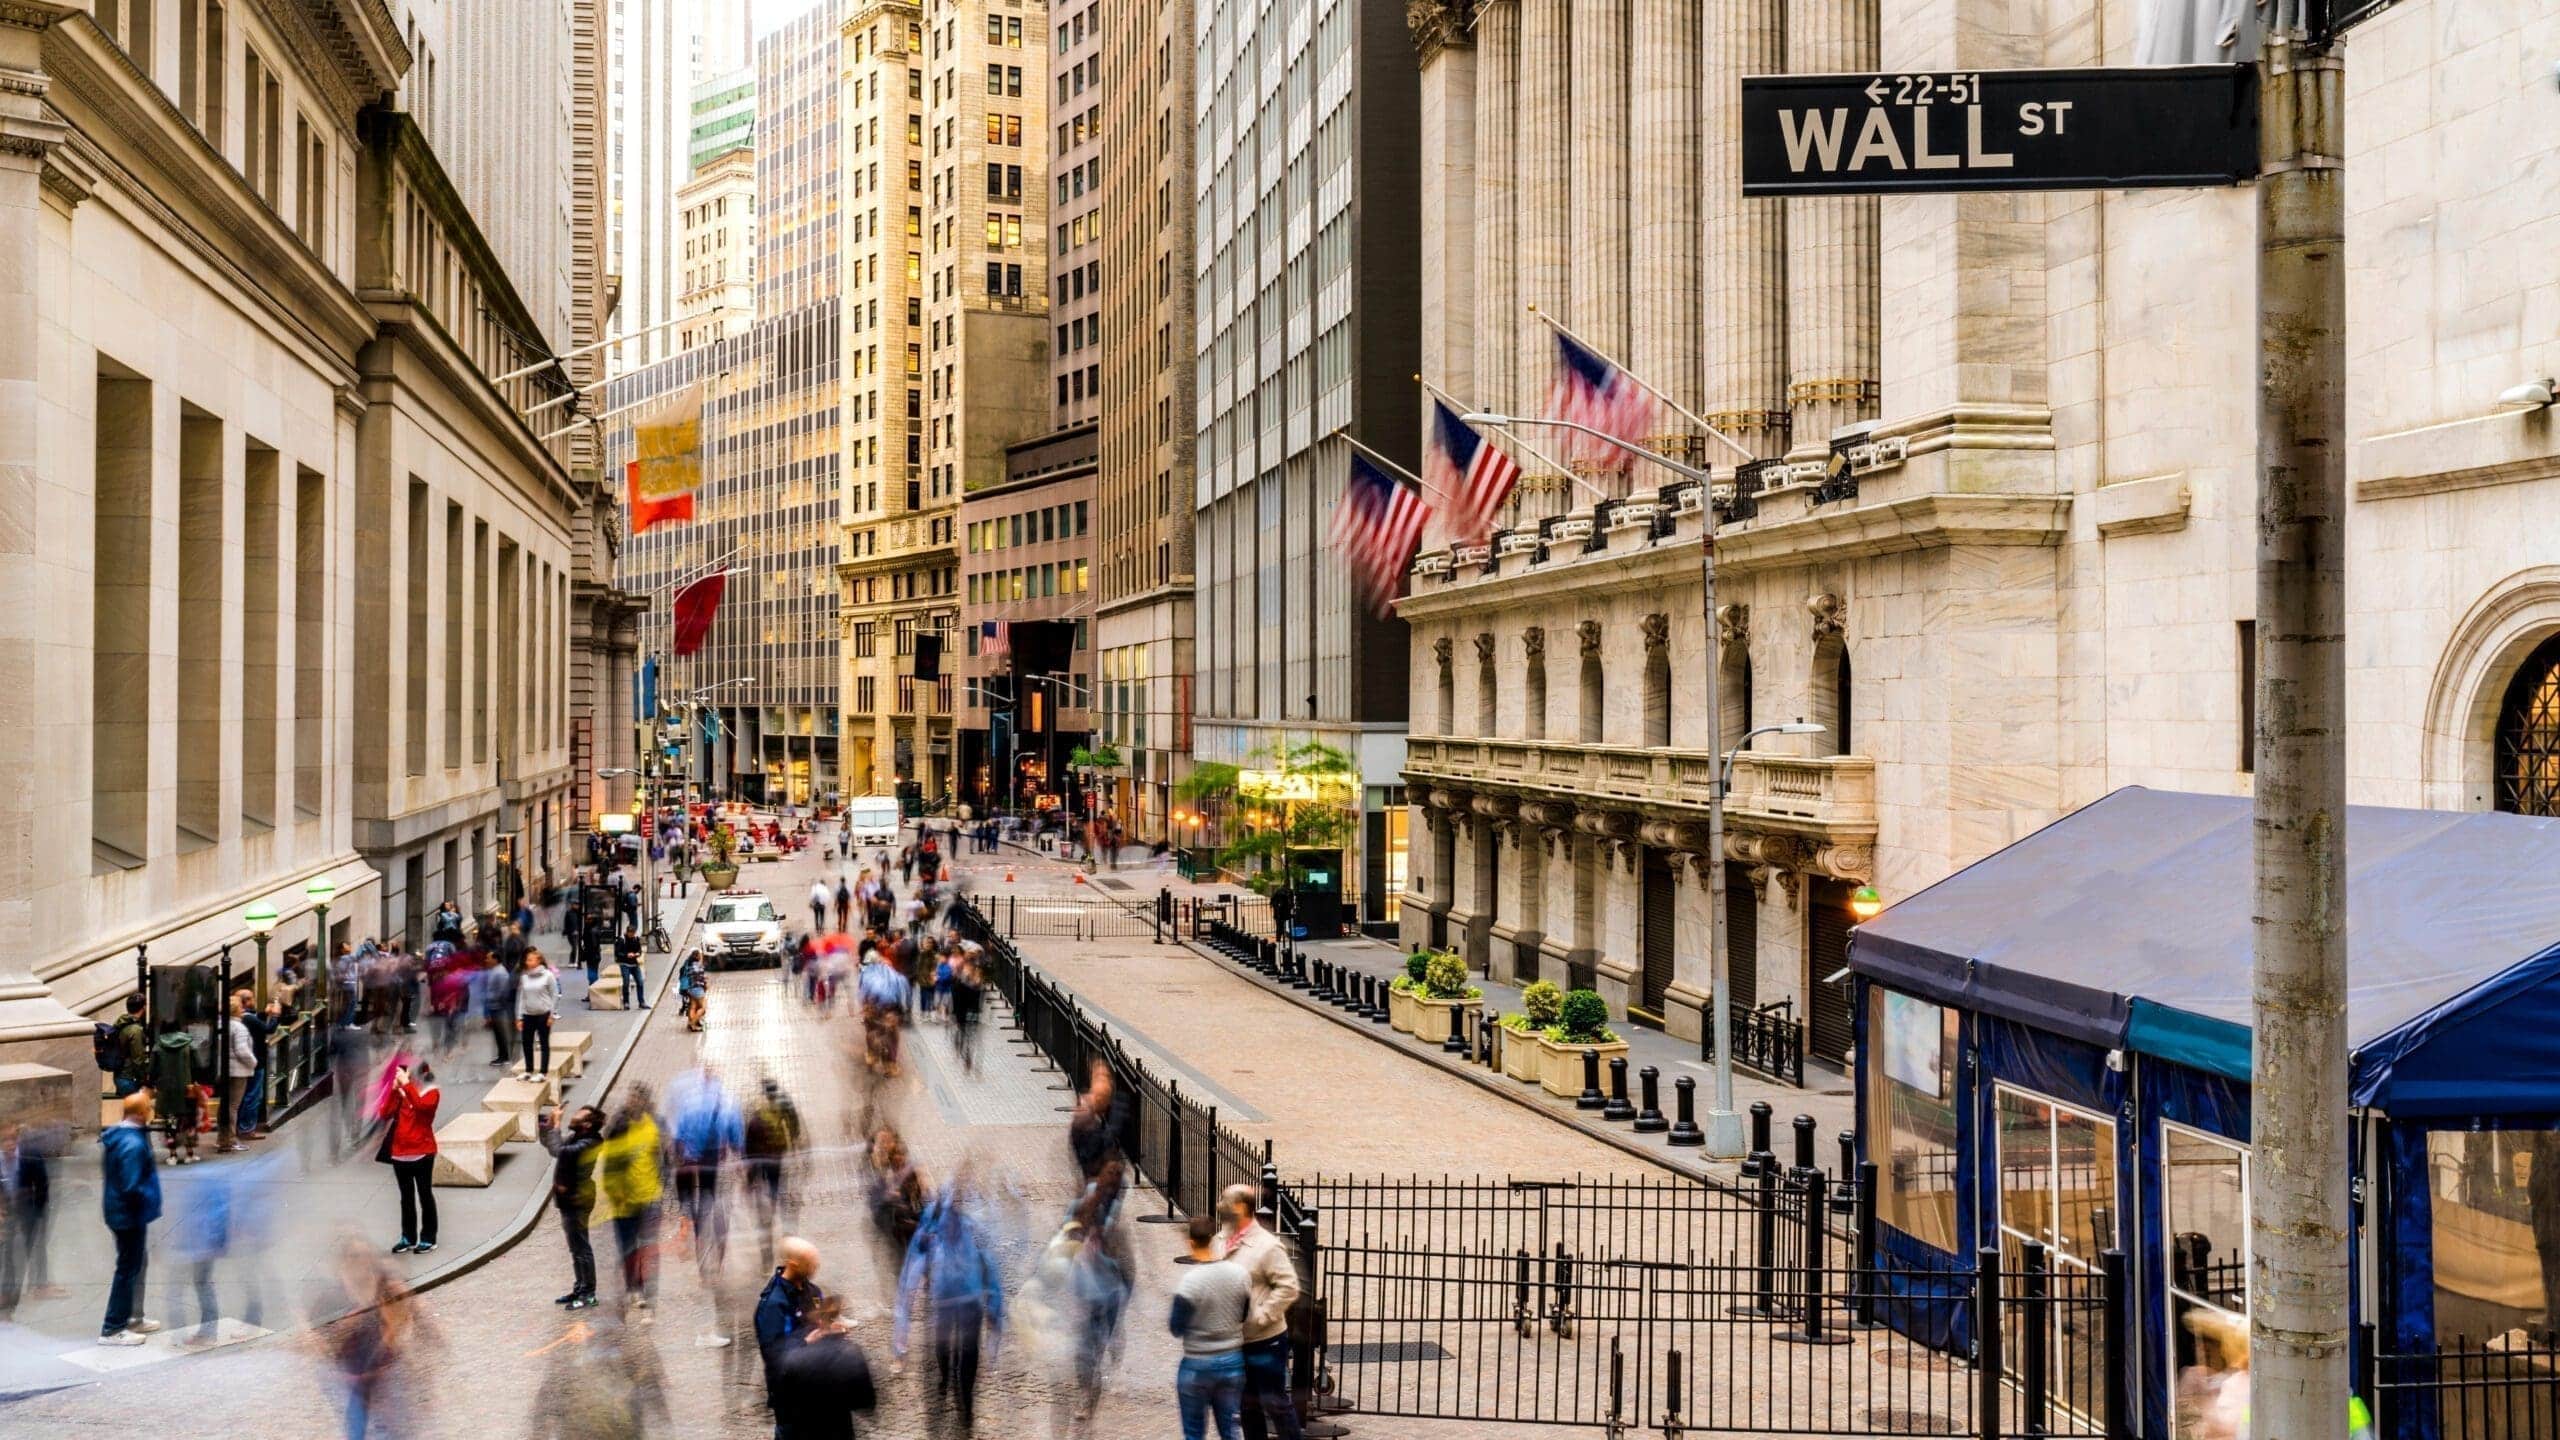 What is the oldest building on Wall Street?